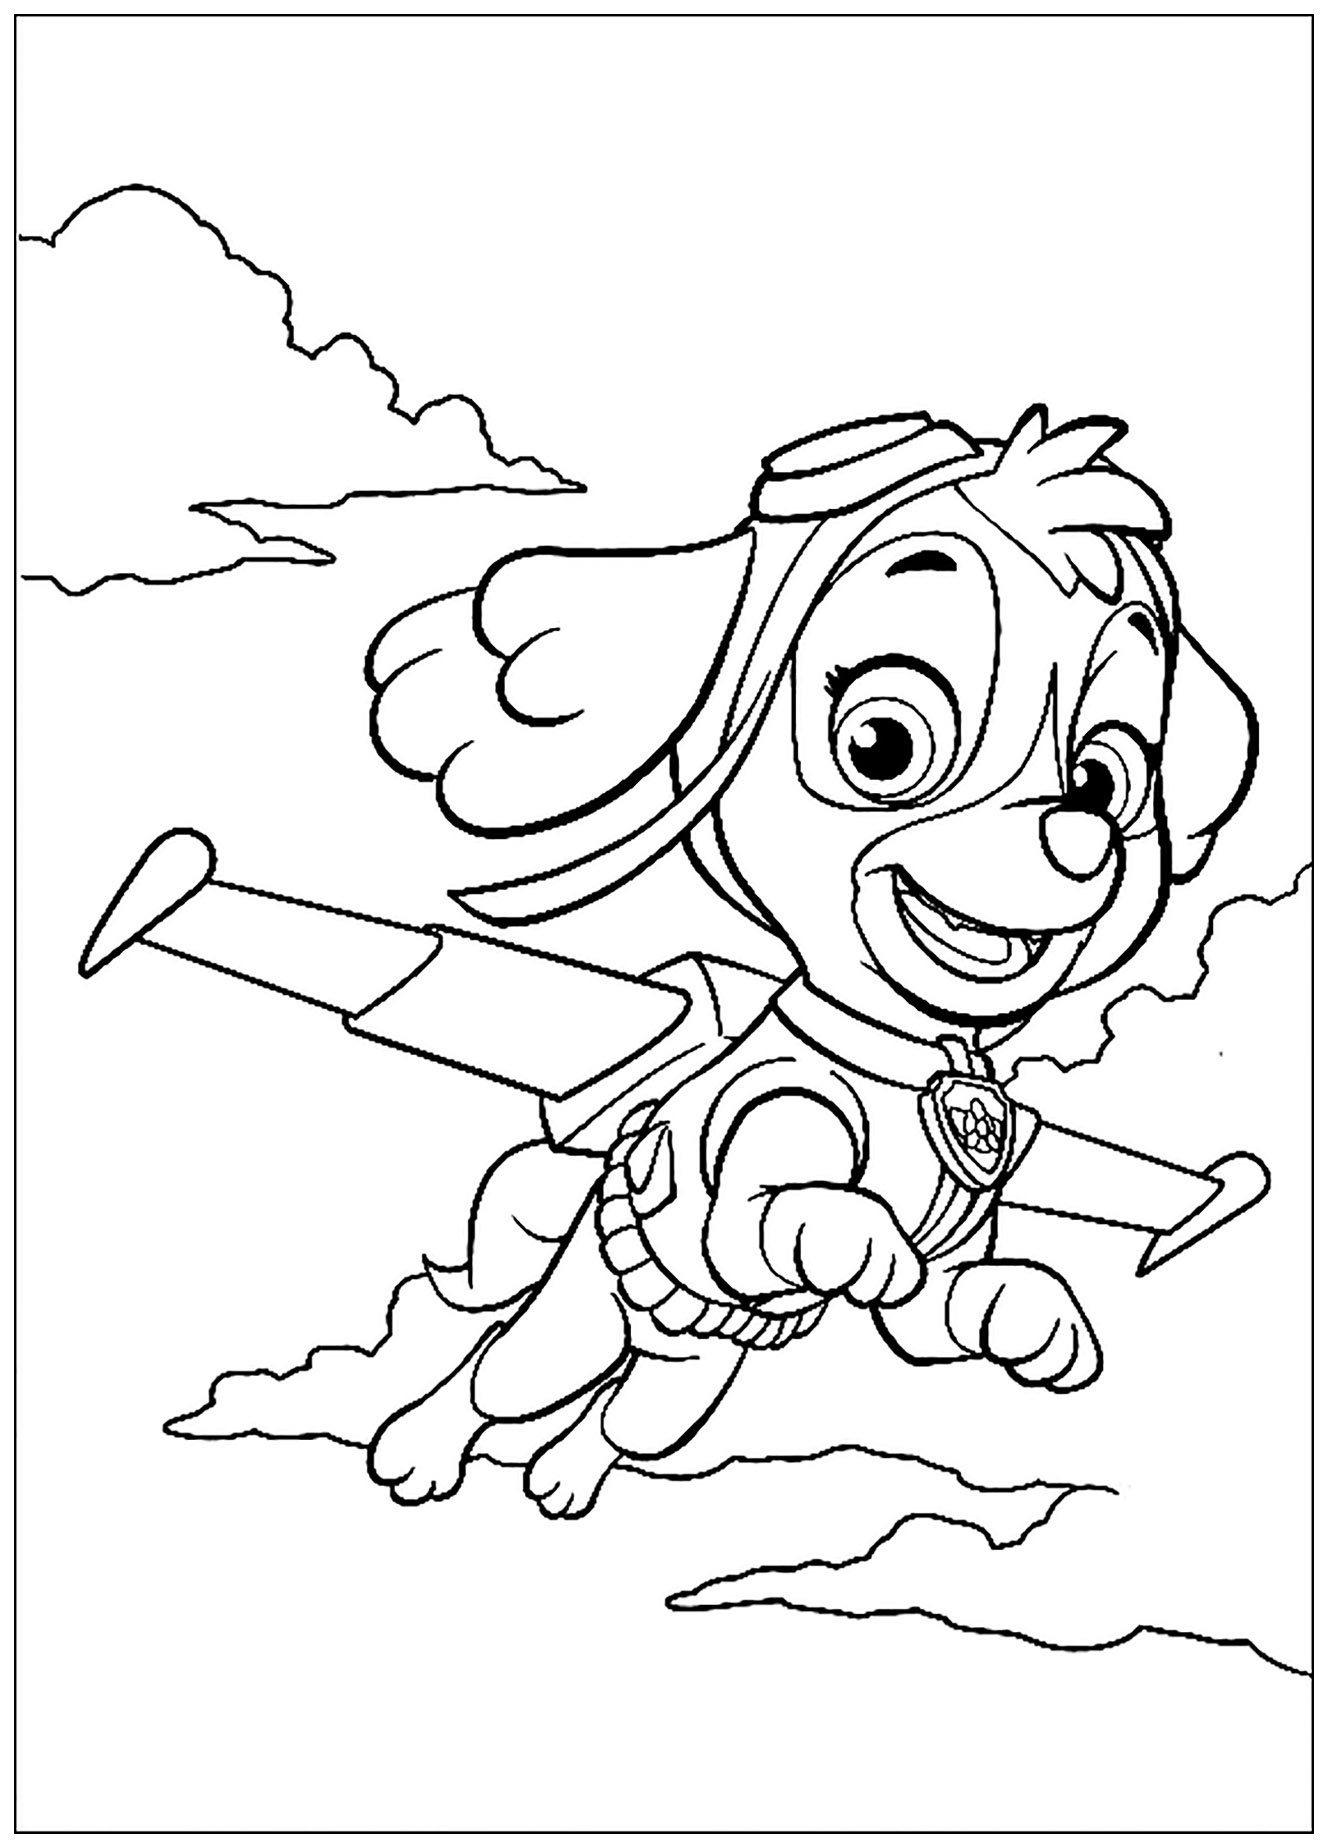 Free Printable Paw Patrol Coloring Pages | Kids Activities Blog